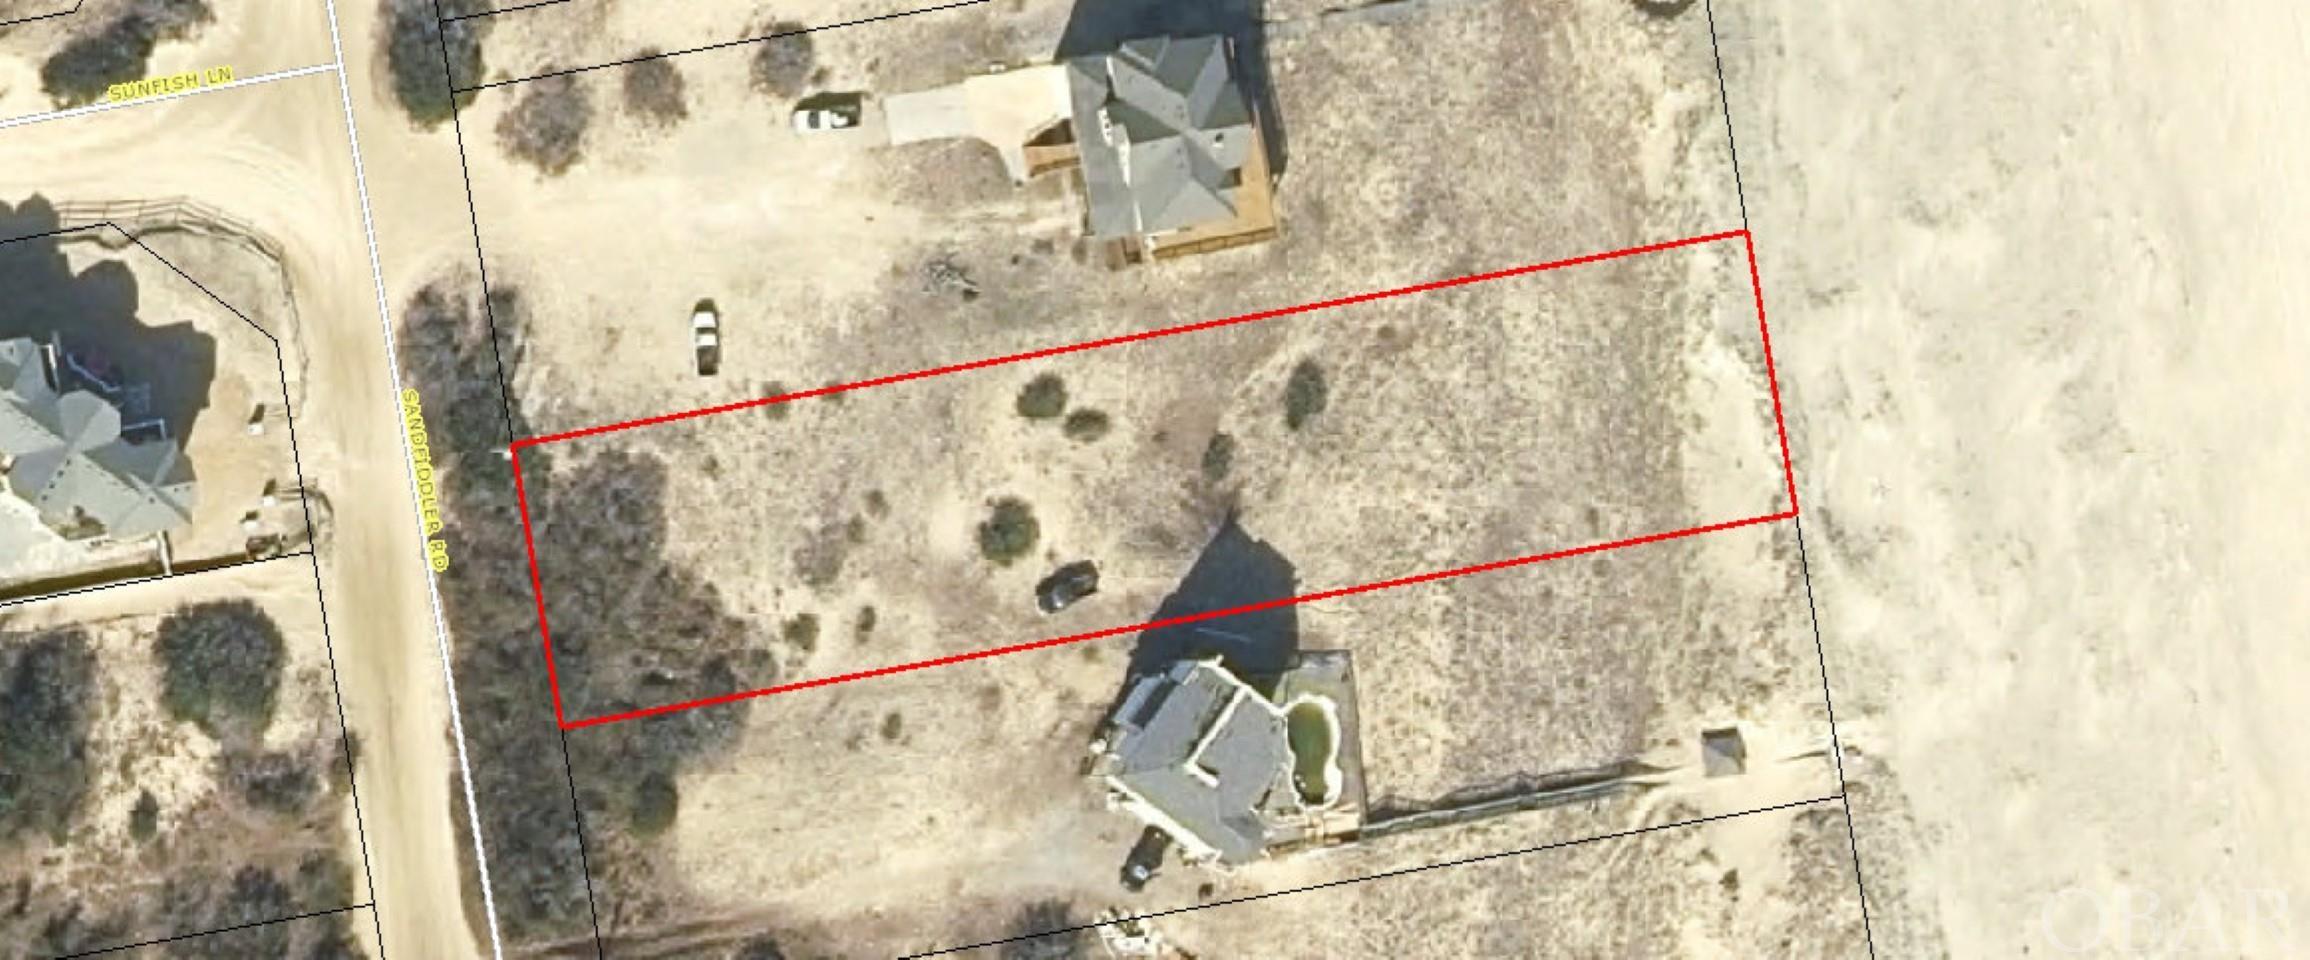 Great 80ft wide oceanfront in Carova Beach. This is an excellent site for a second home or potential vacation rental home.  Located on one of the most stable dune lines on the Outer Banks, this remote stretch of beach is a must see!